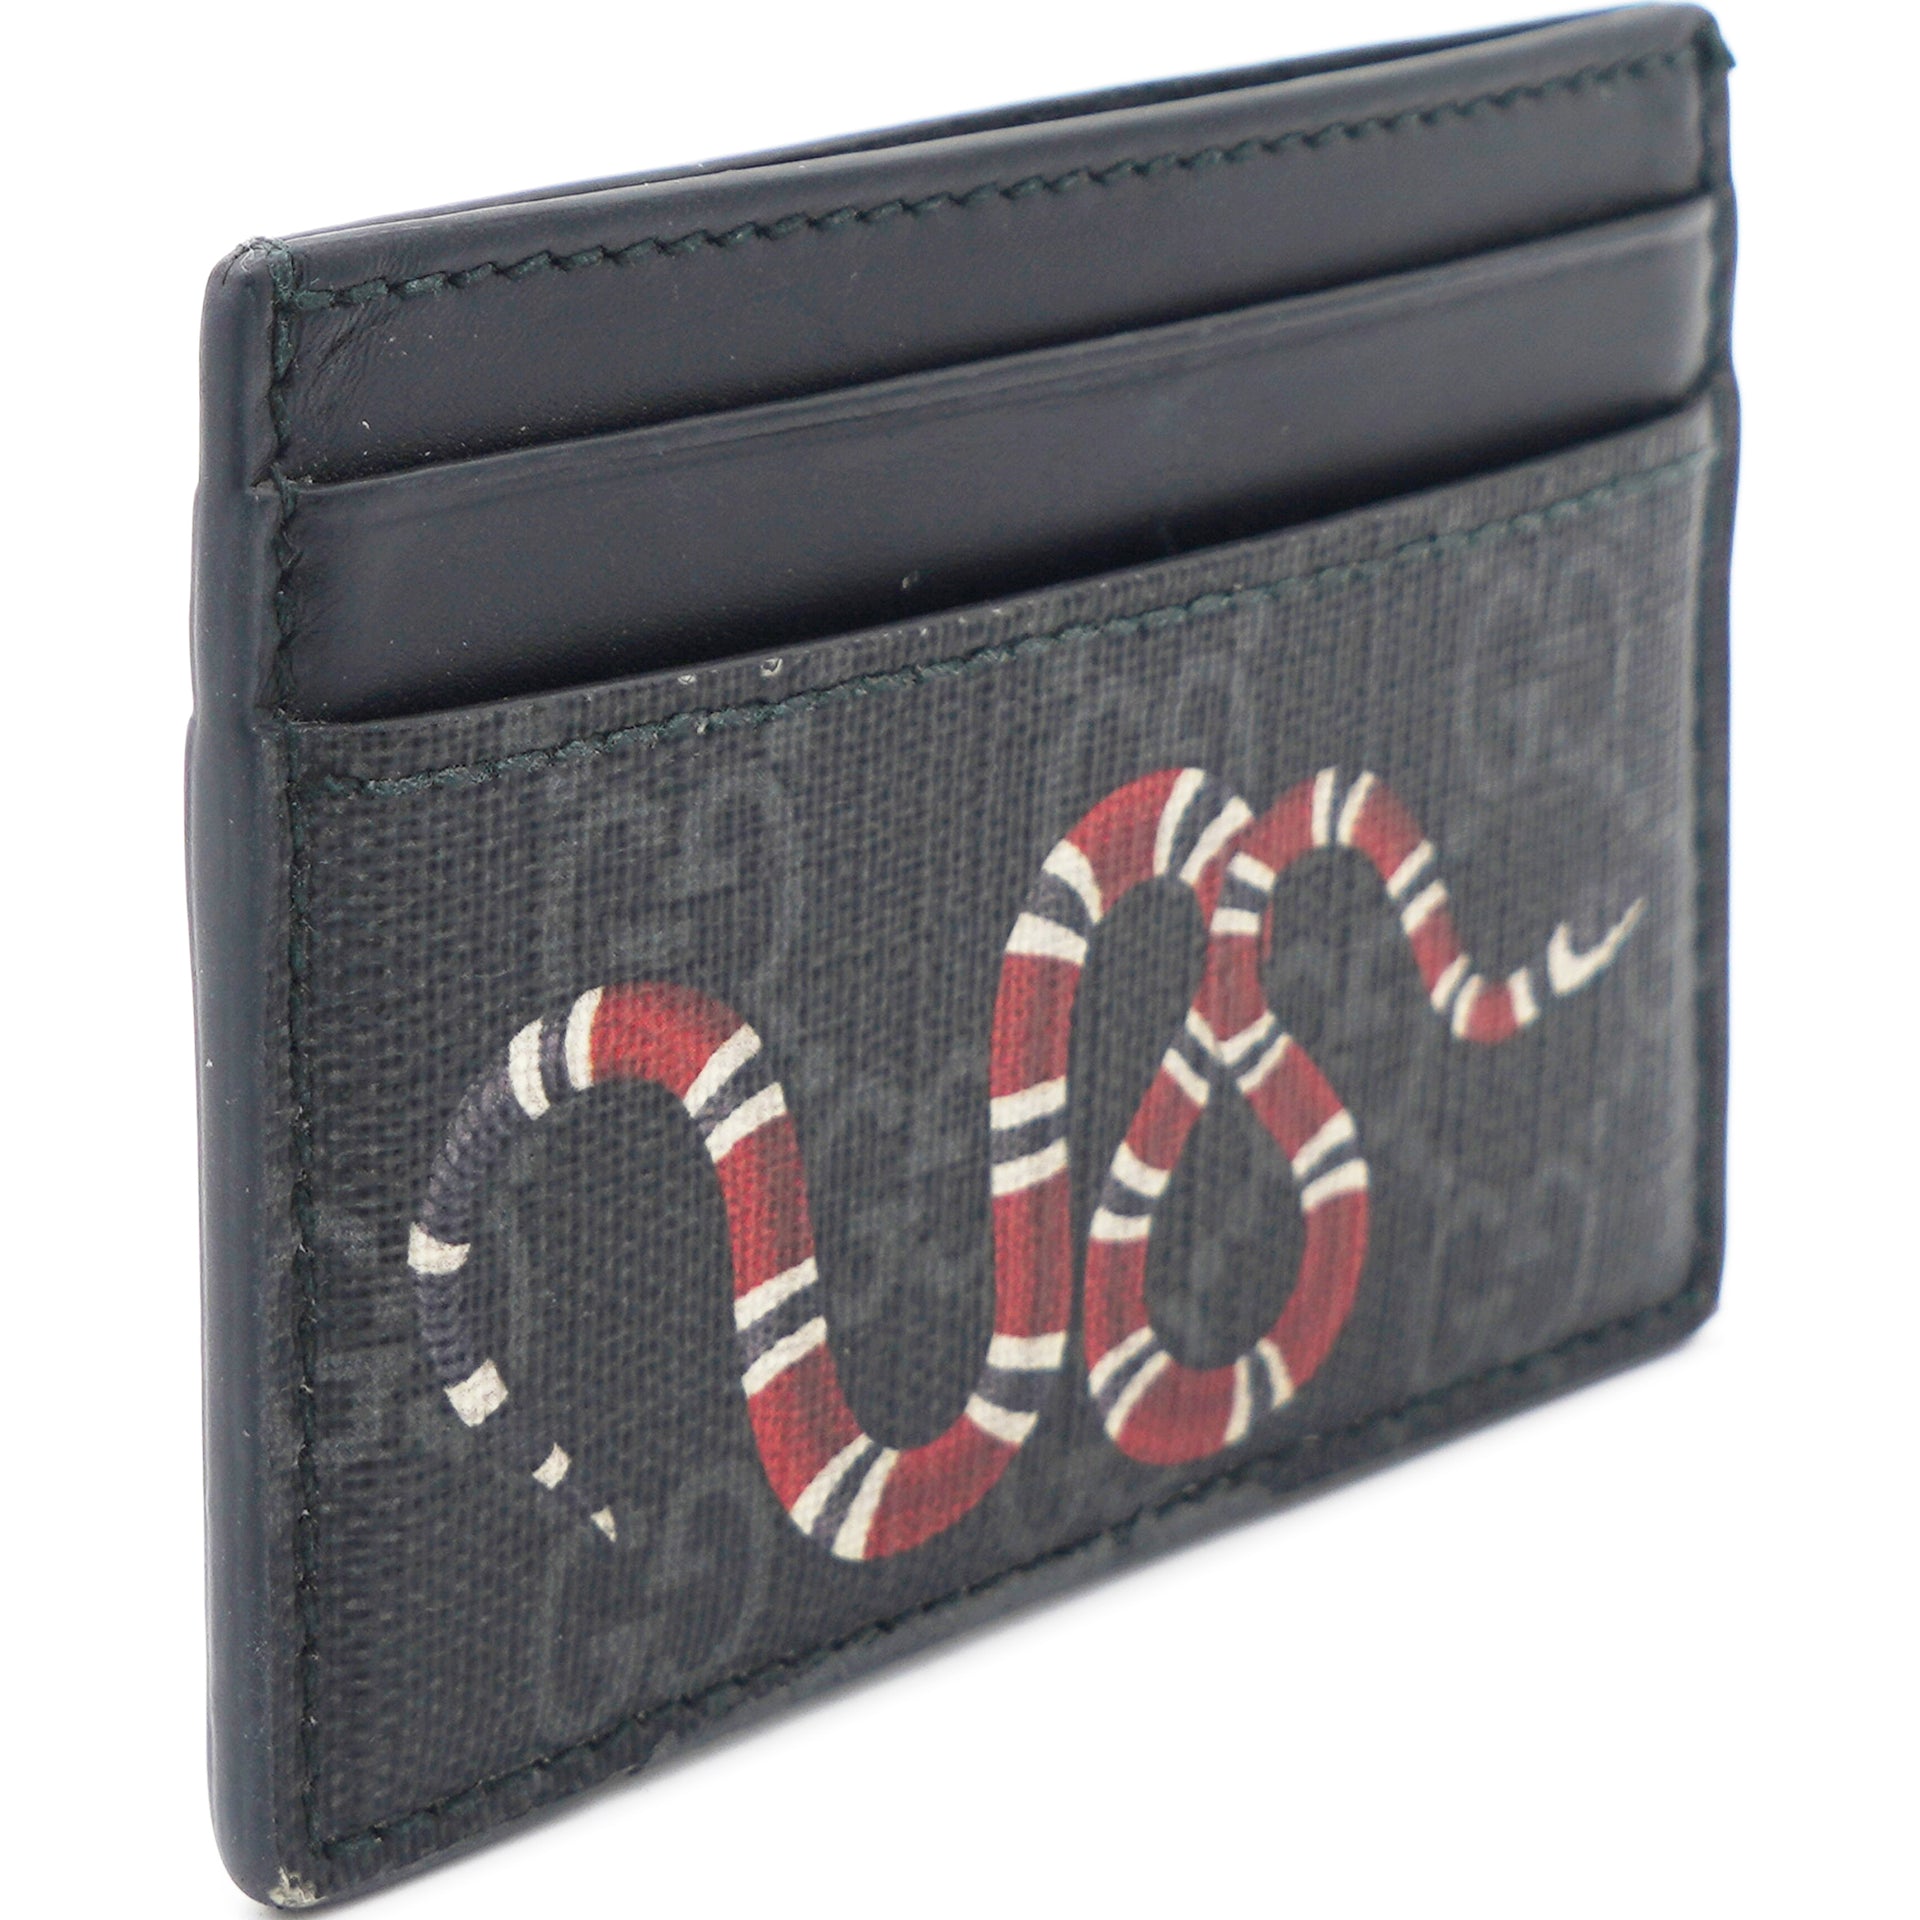 Gucci, Accessories, Mens Gucci Kingsnake Card Case Wallet